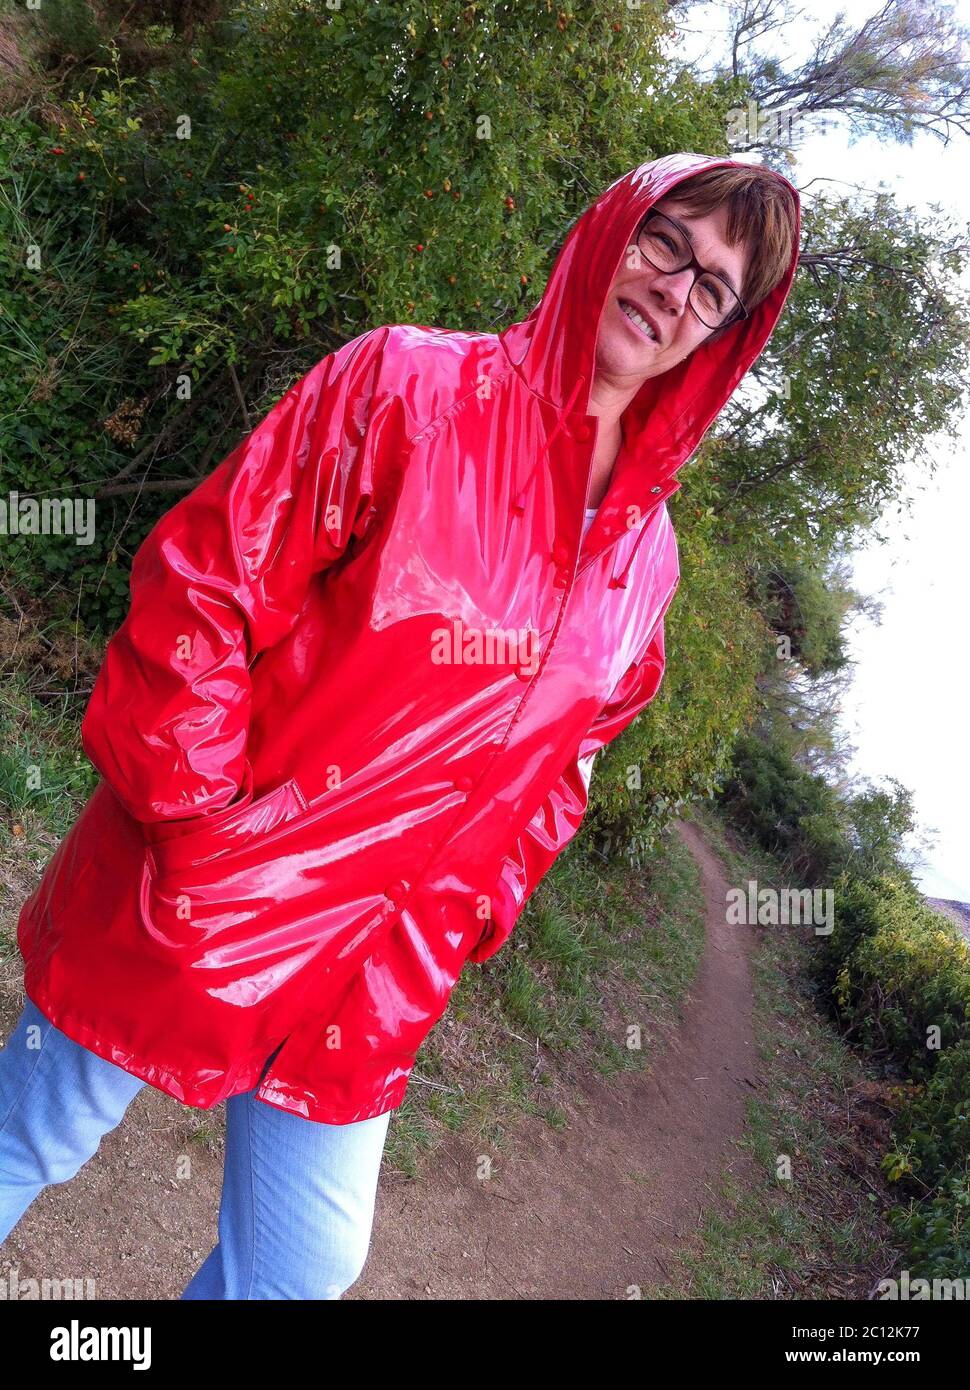 Smiling woman under a heavy rain, Brittany, France Stock Photo